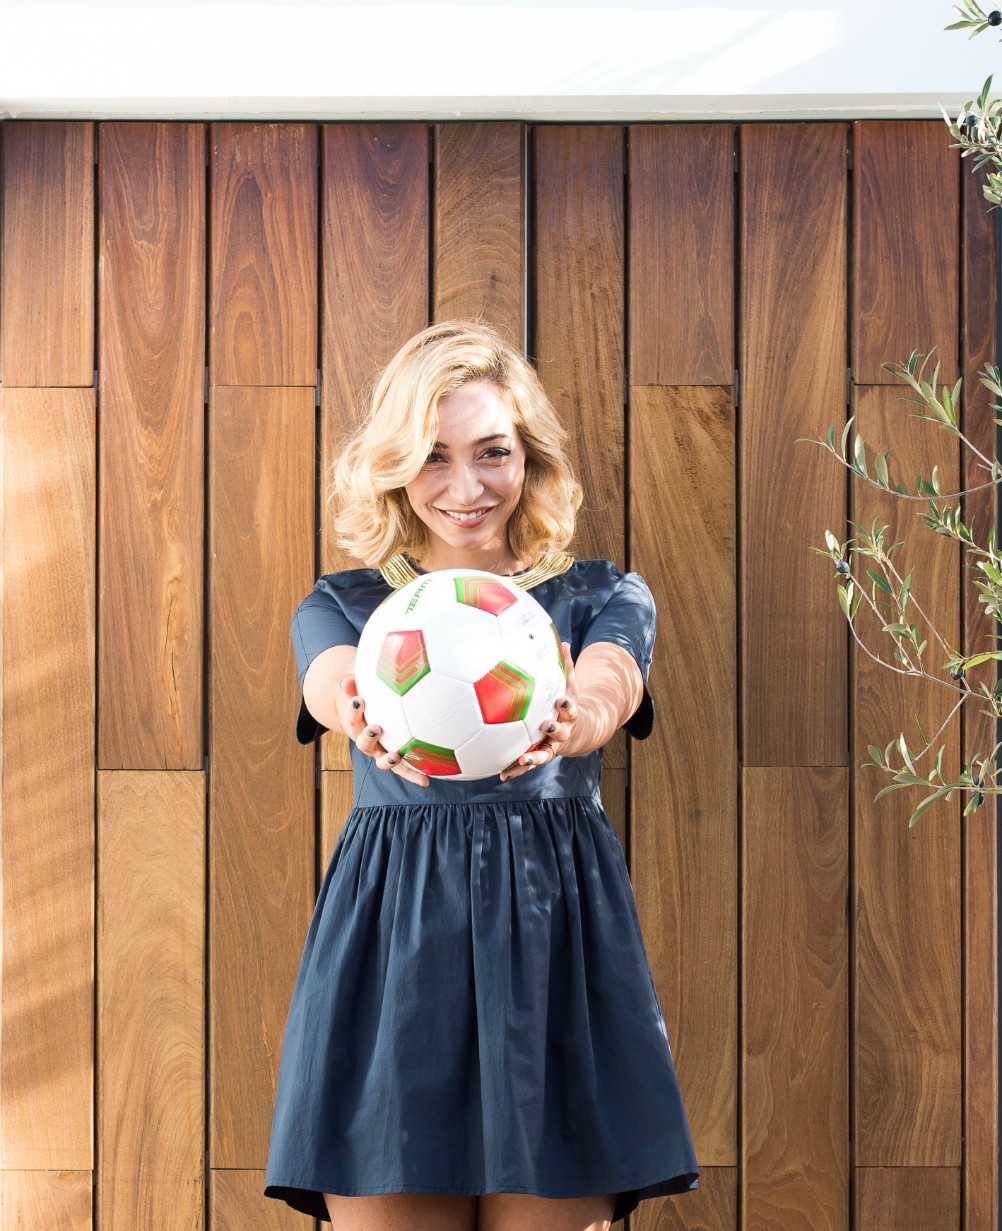 host poses with soccer ball